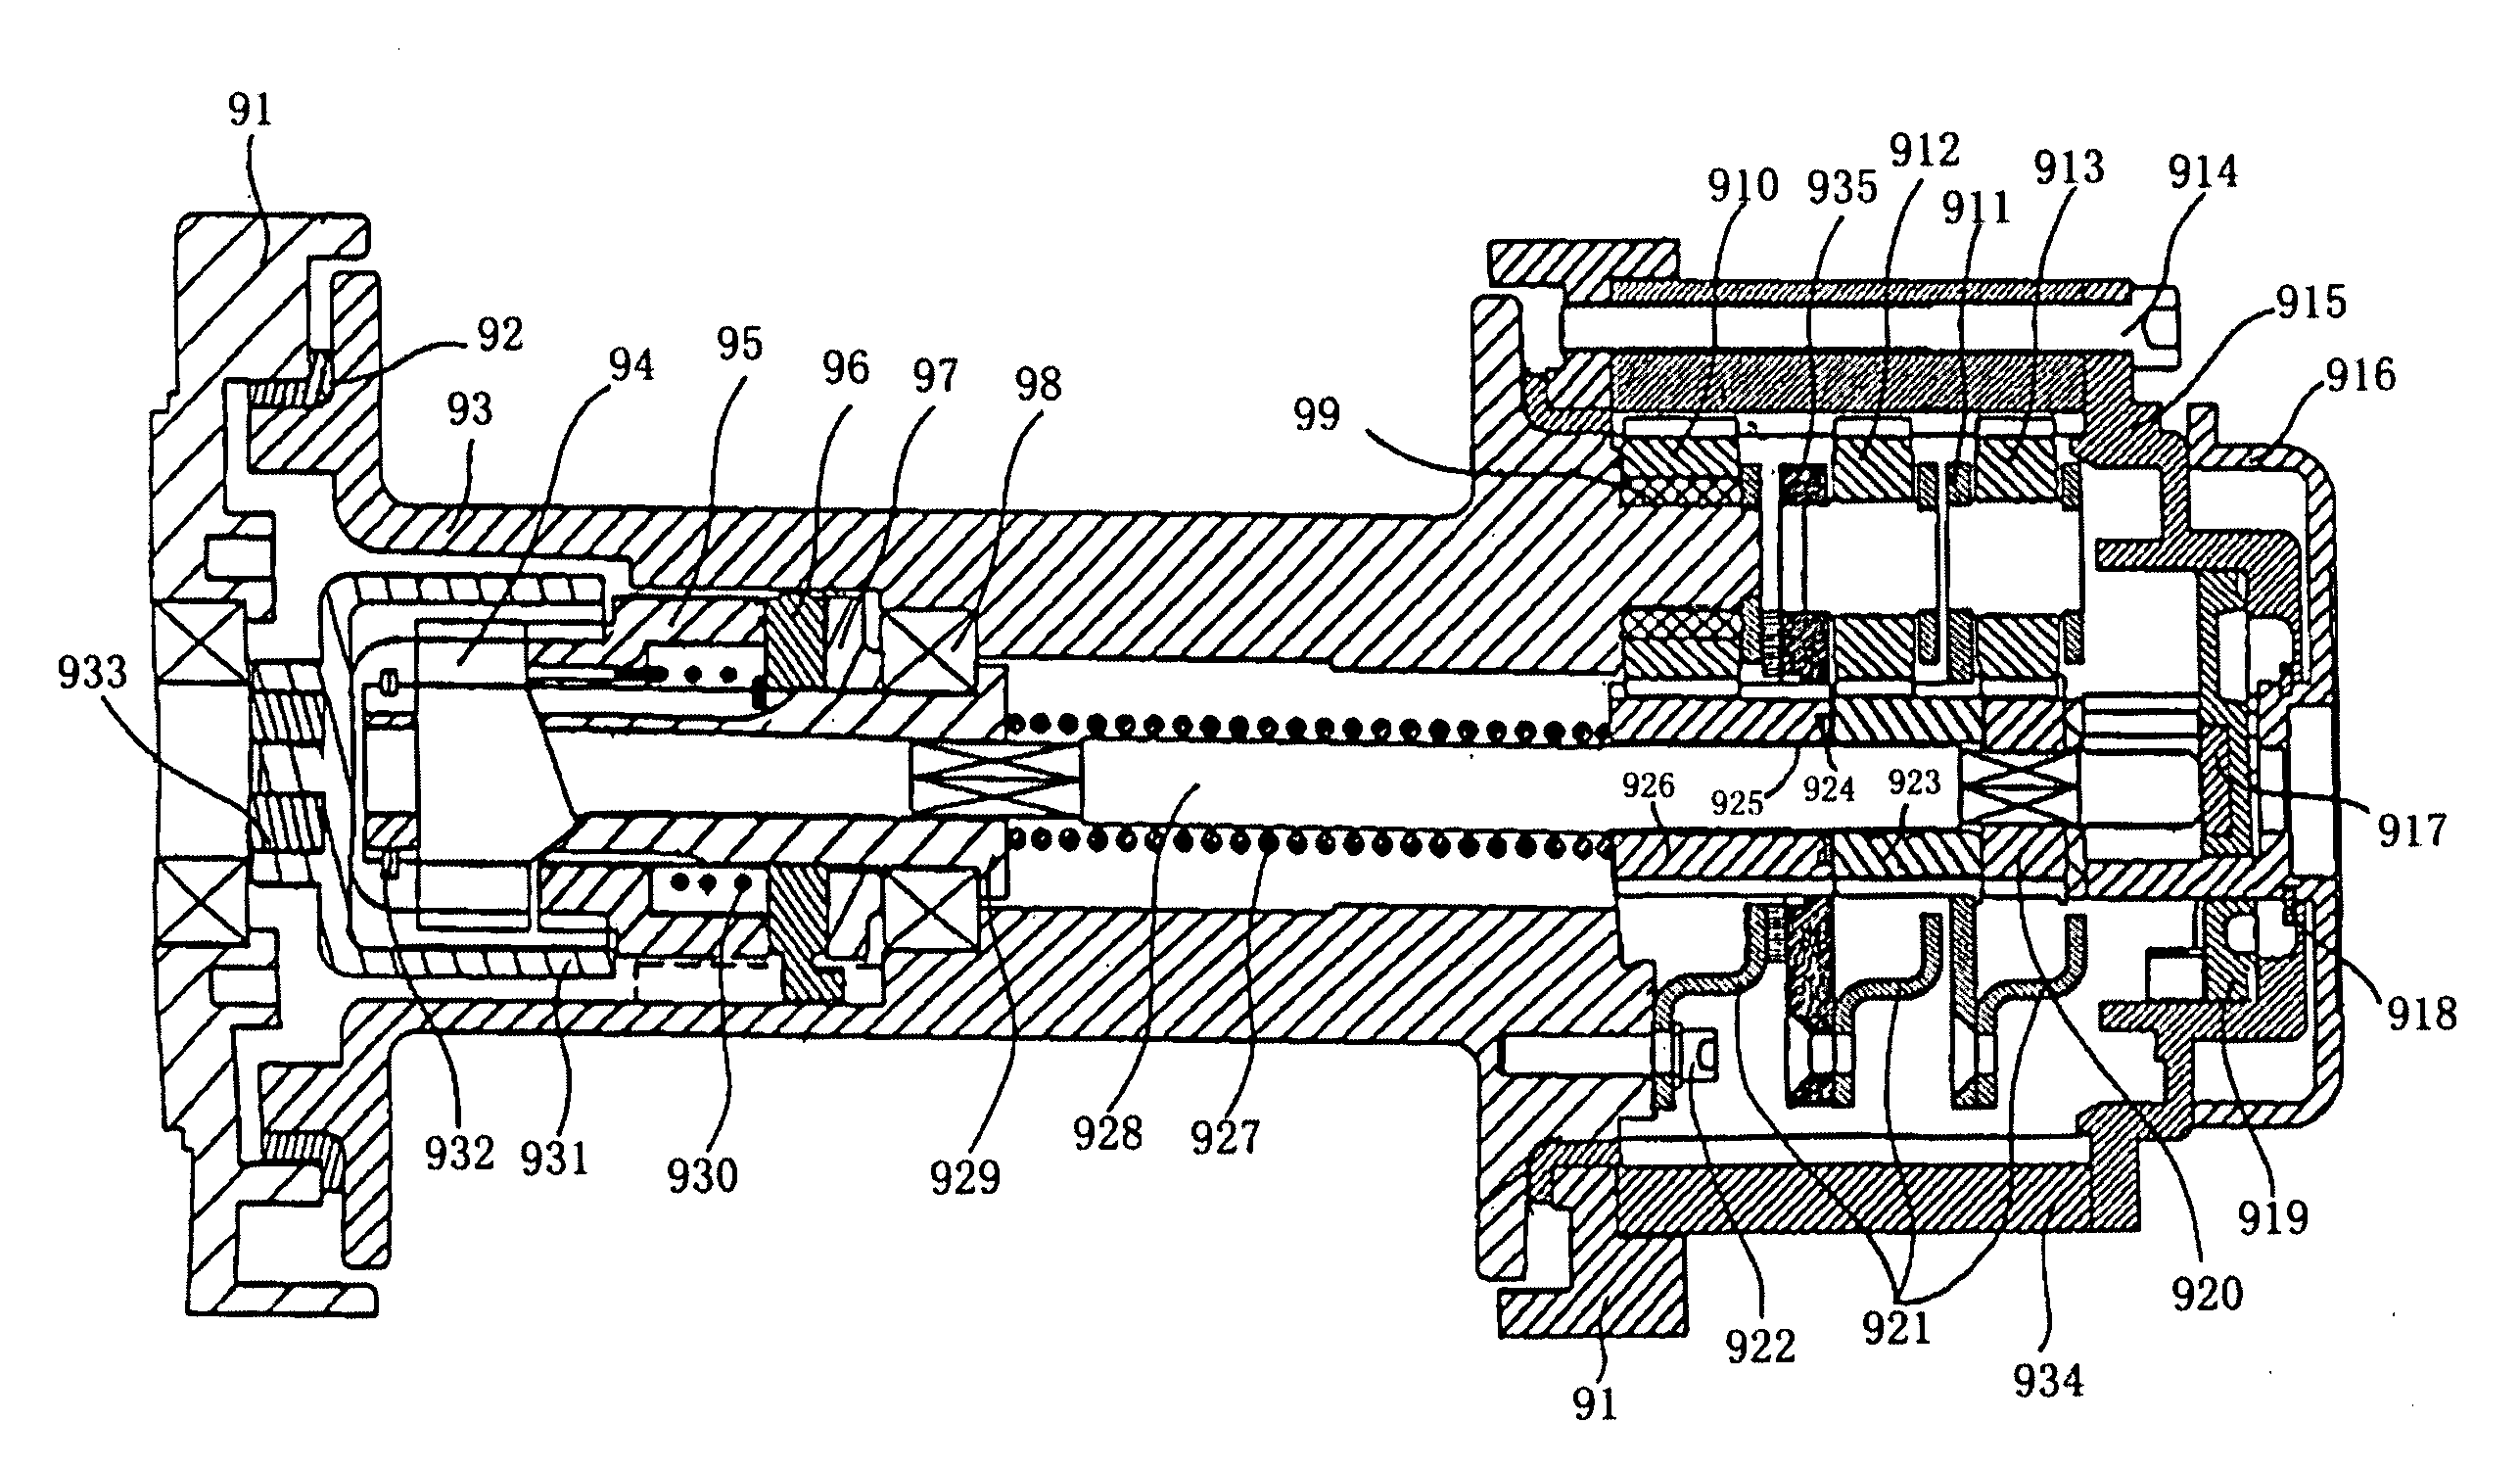 Plane braking device for electric winches and electric winch